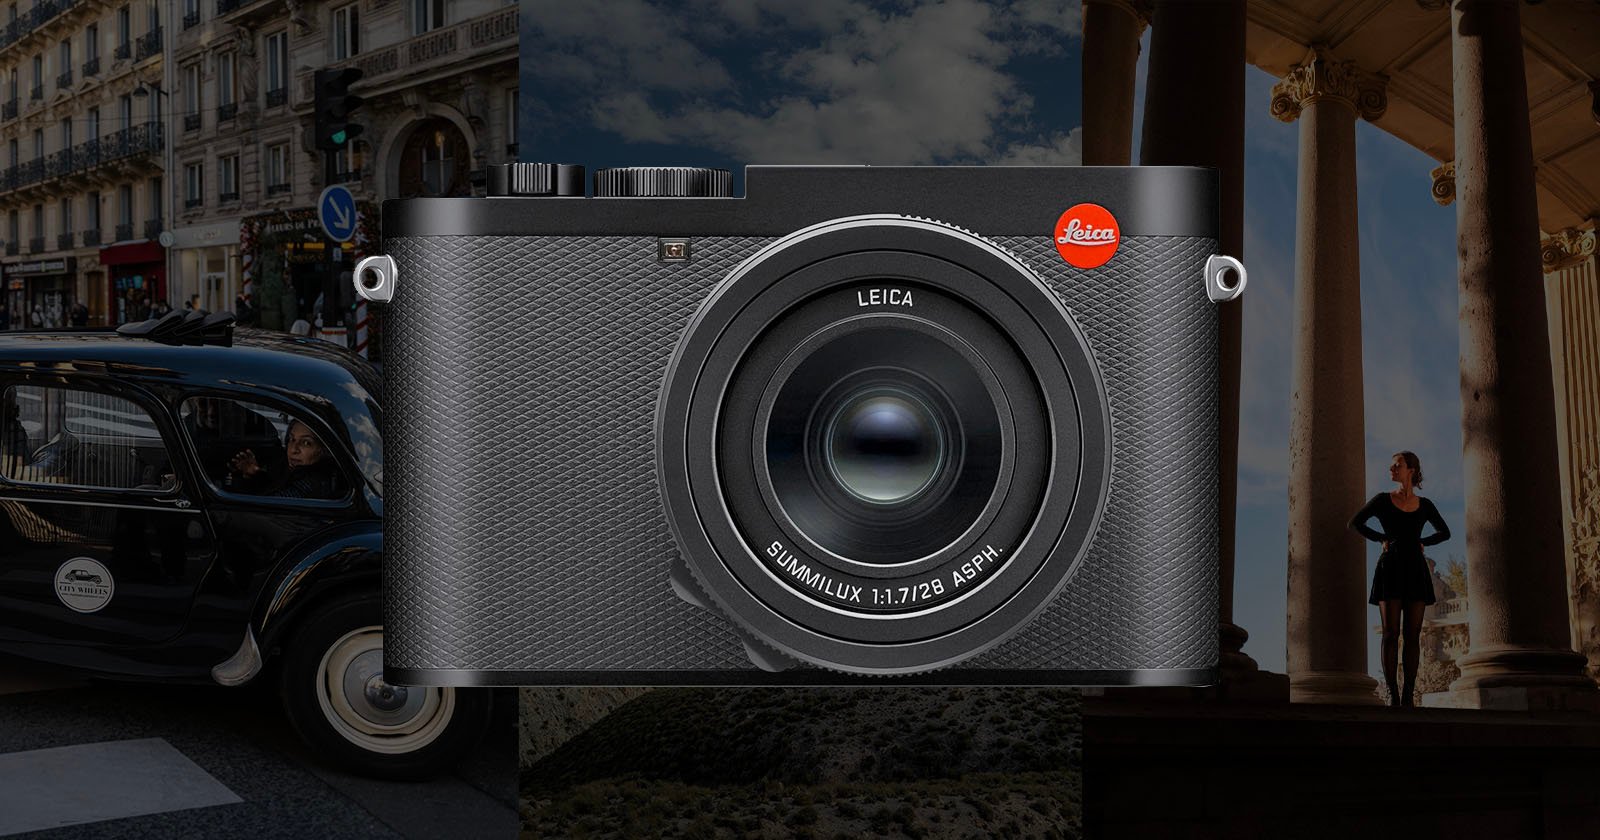  leica review from canon photographer hit miss 